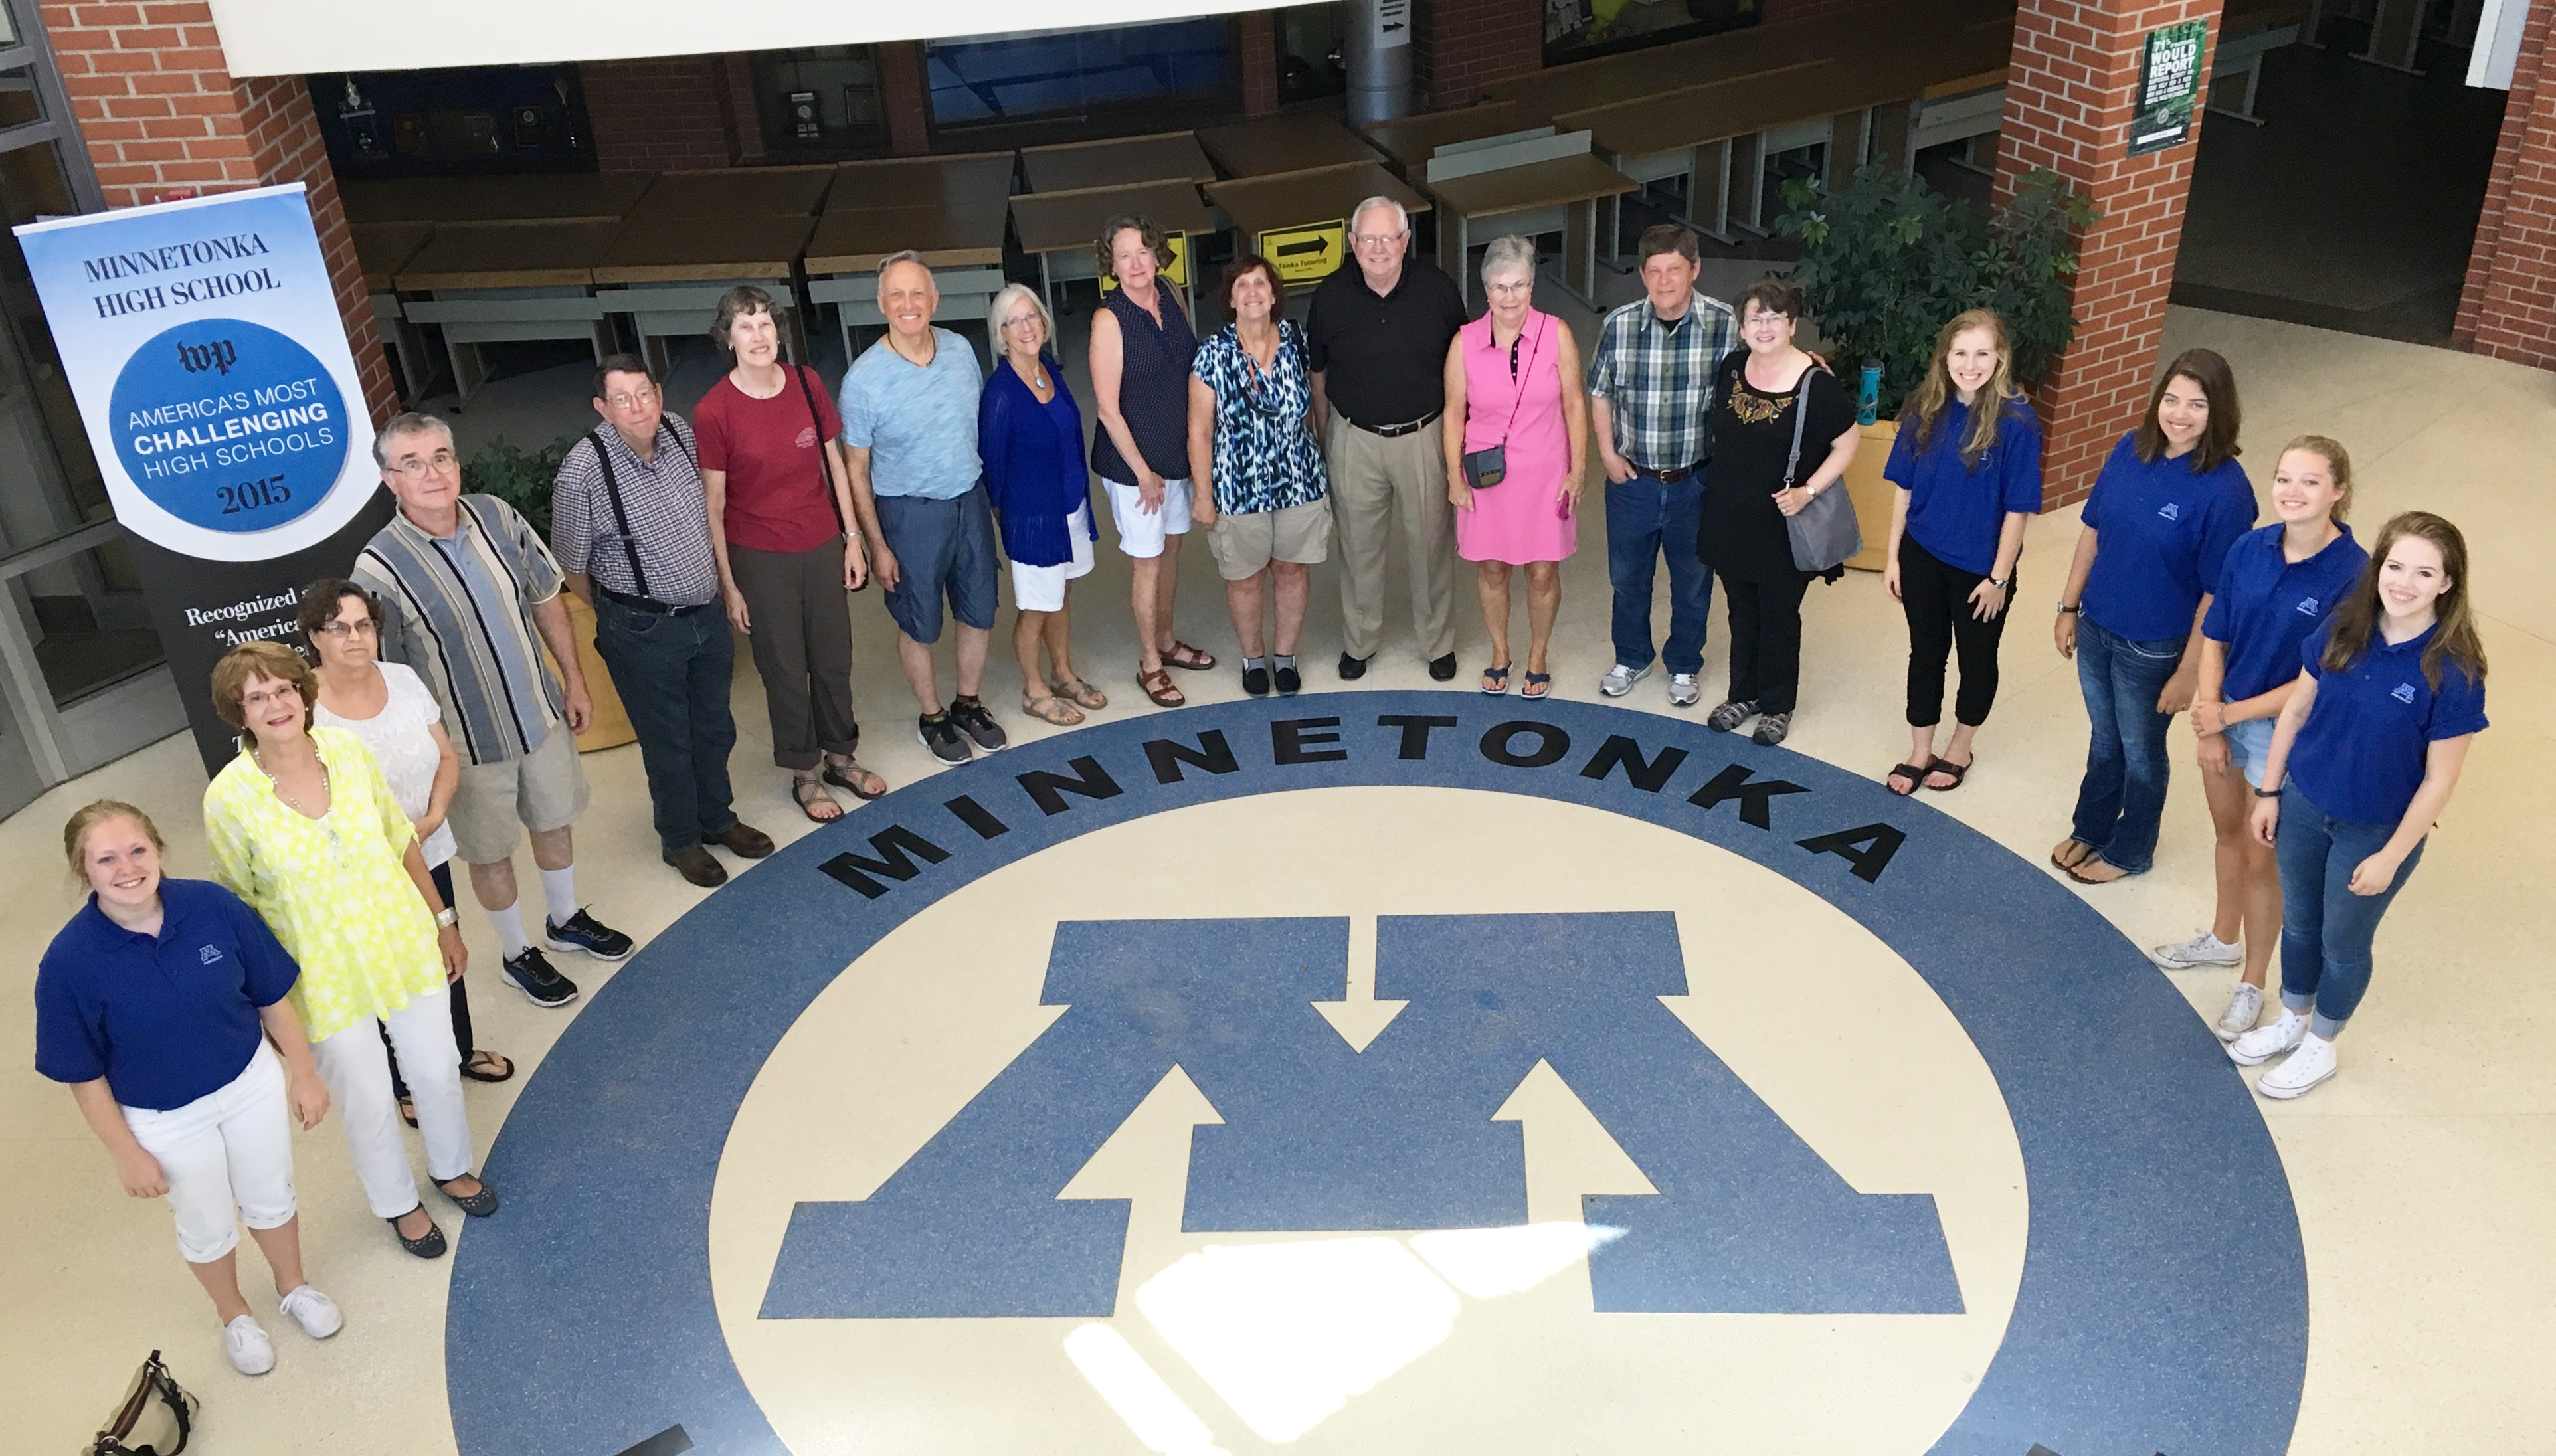 Touring MHS at the 50th Reunion in 2016